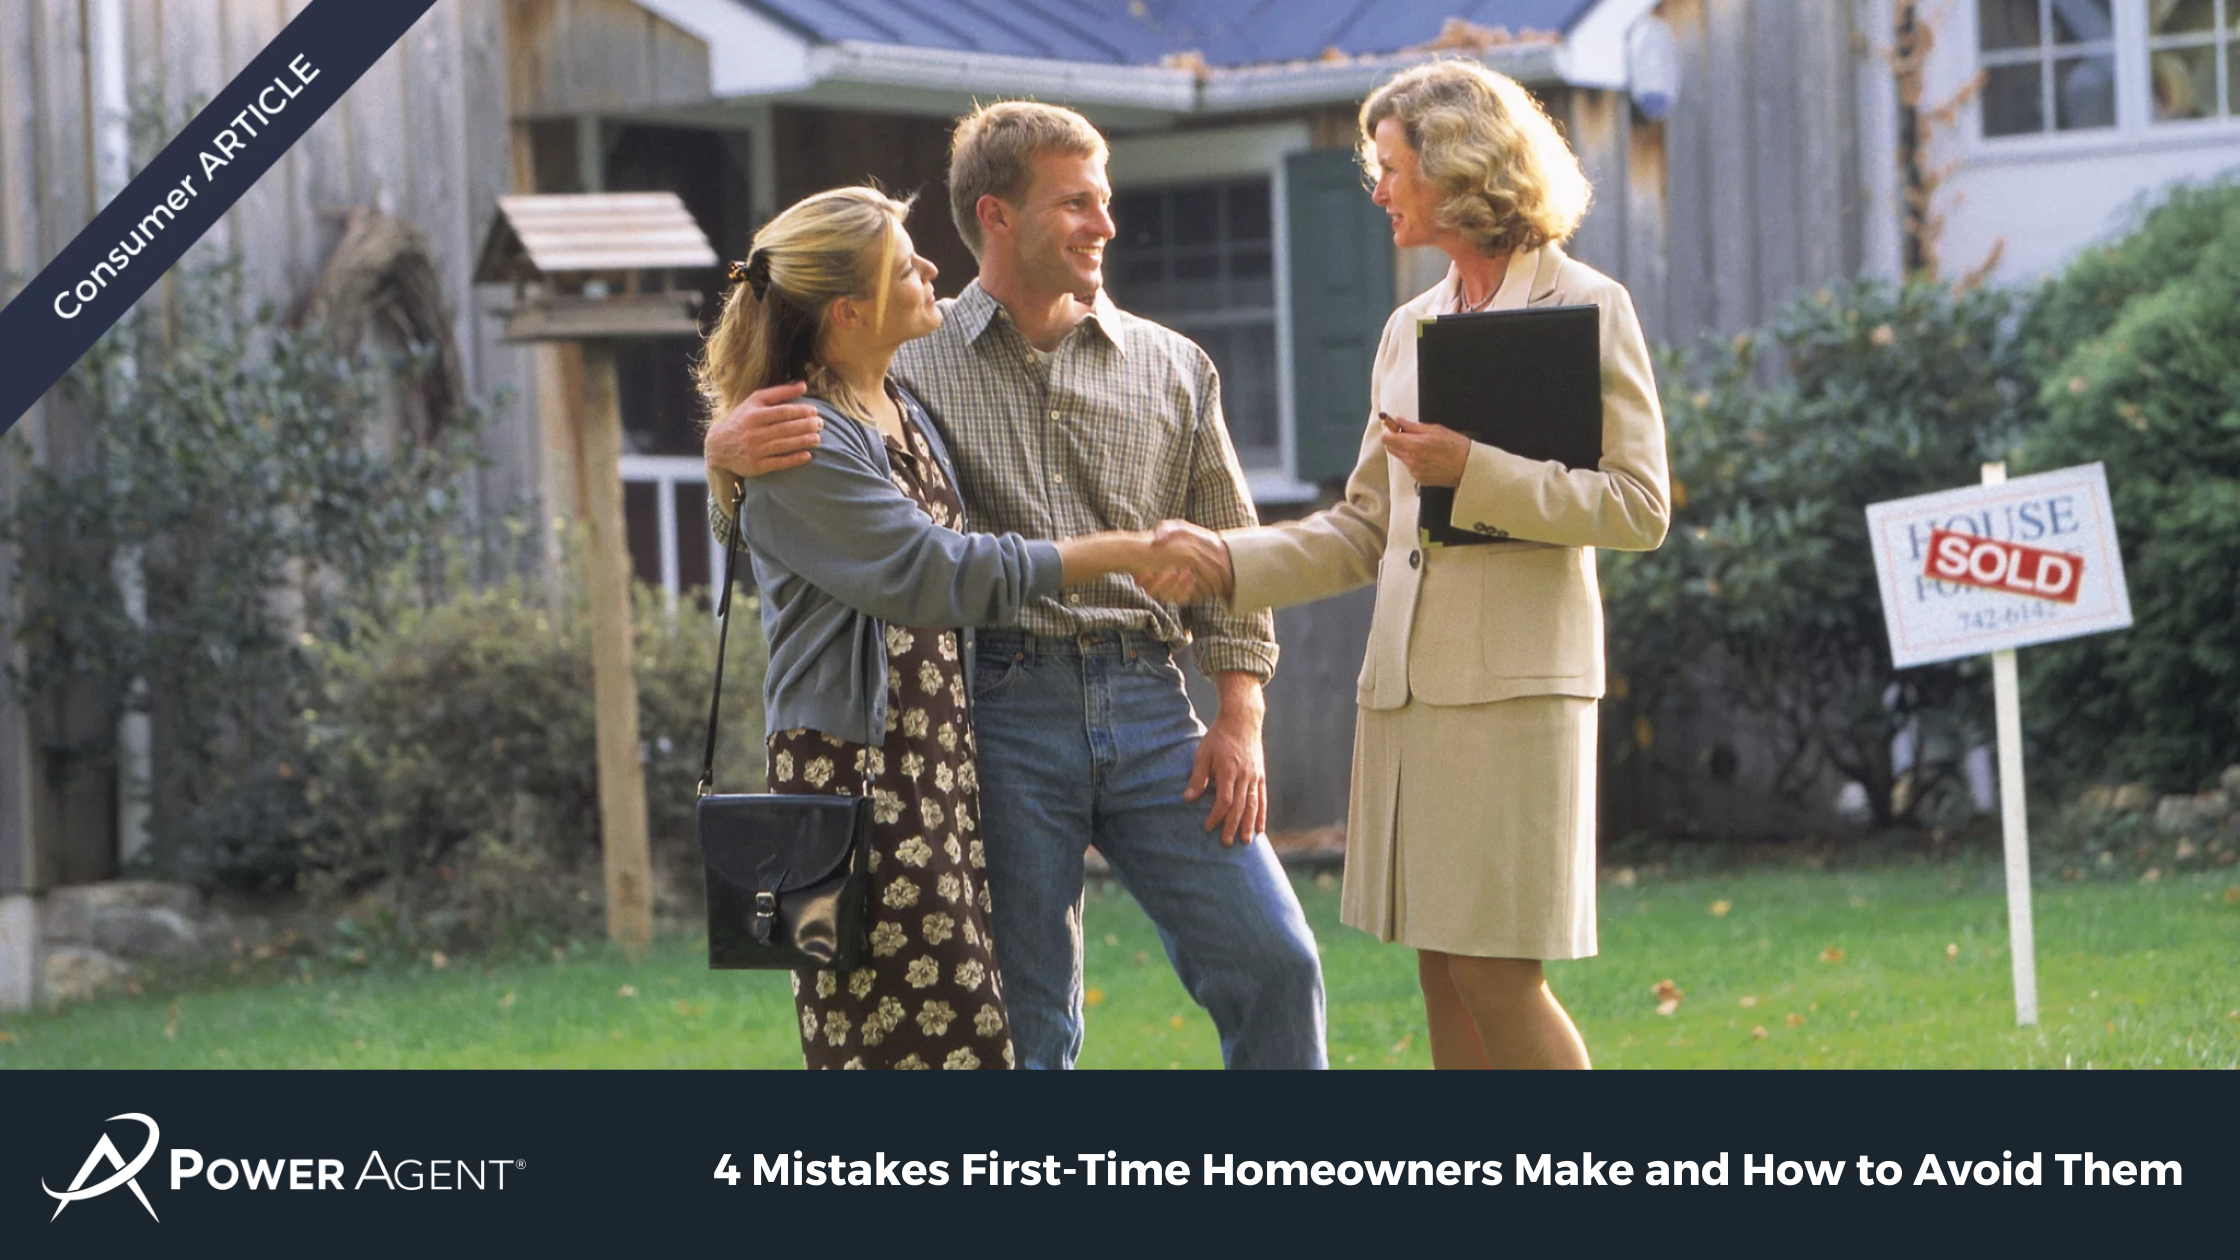 4 Mistakes First-Time Homeowners Make and How to Avoid Them